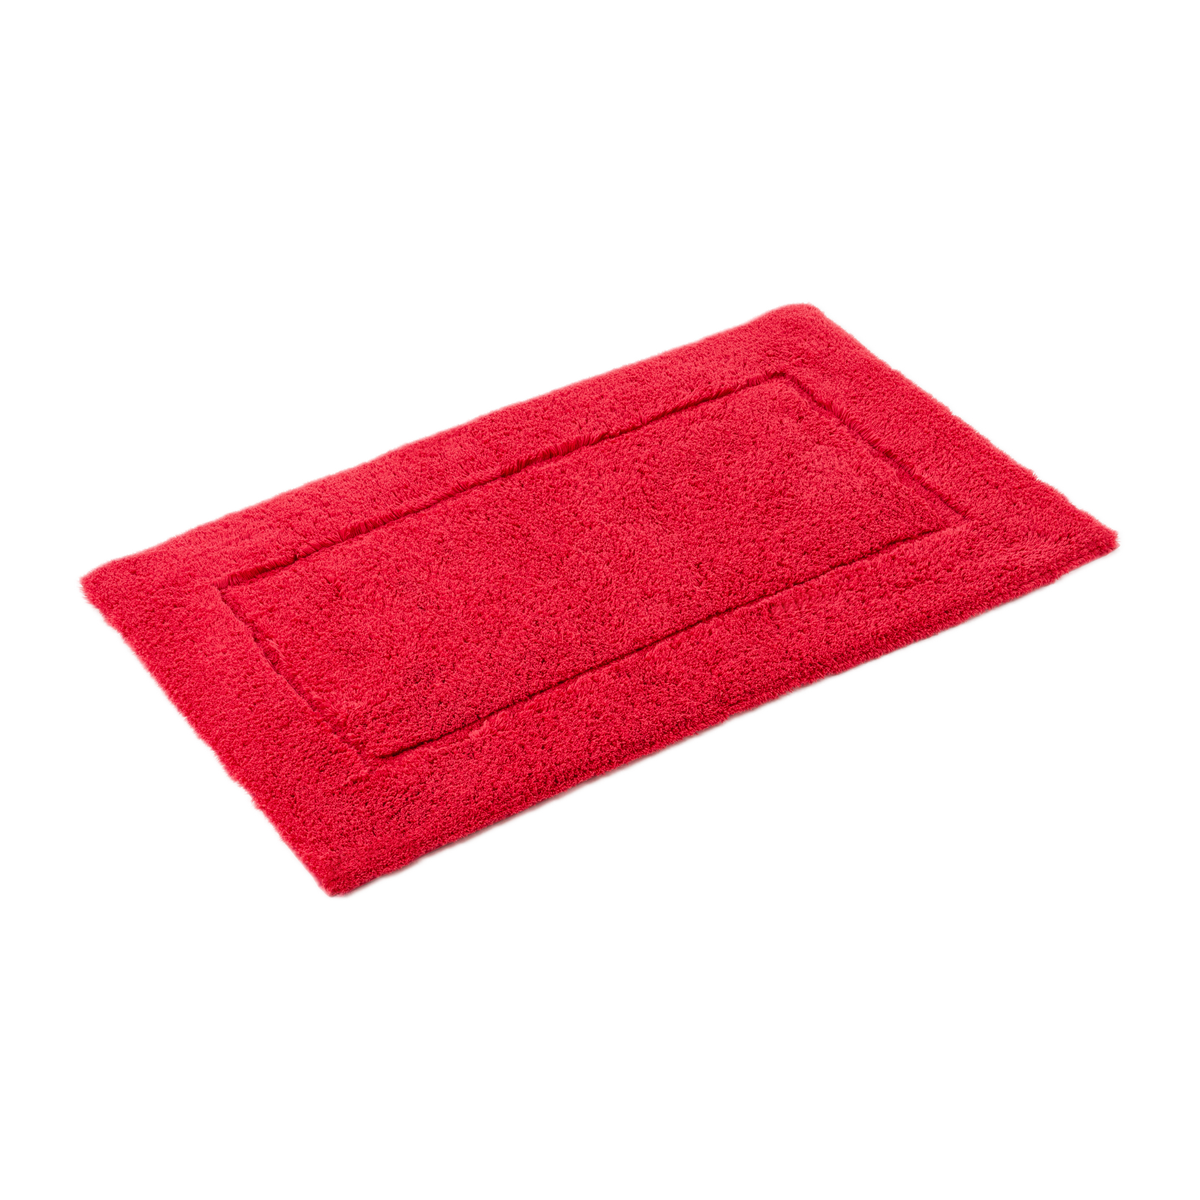 Slanted View of Abyss Habidecor Must Bath Rug in Viva Magenta Color